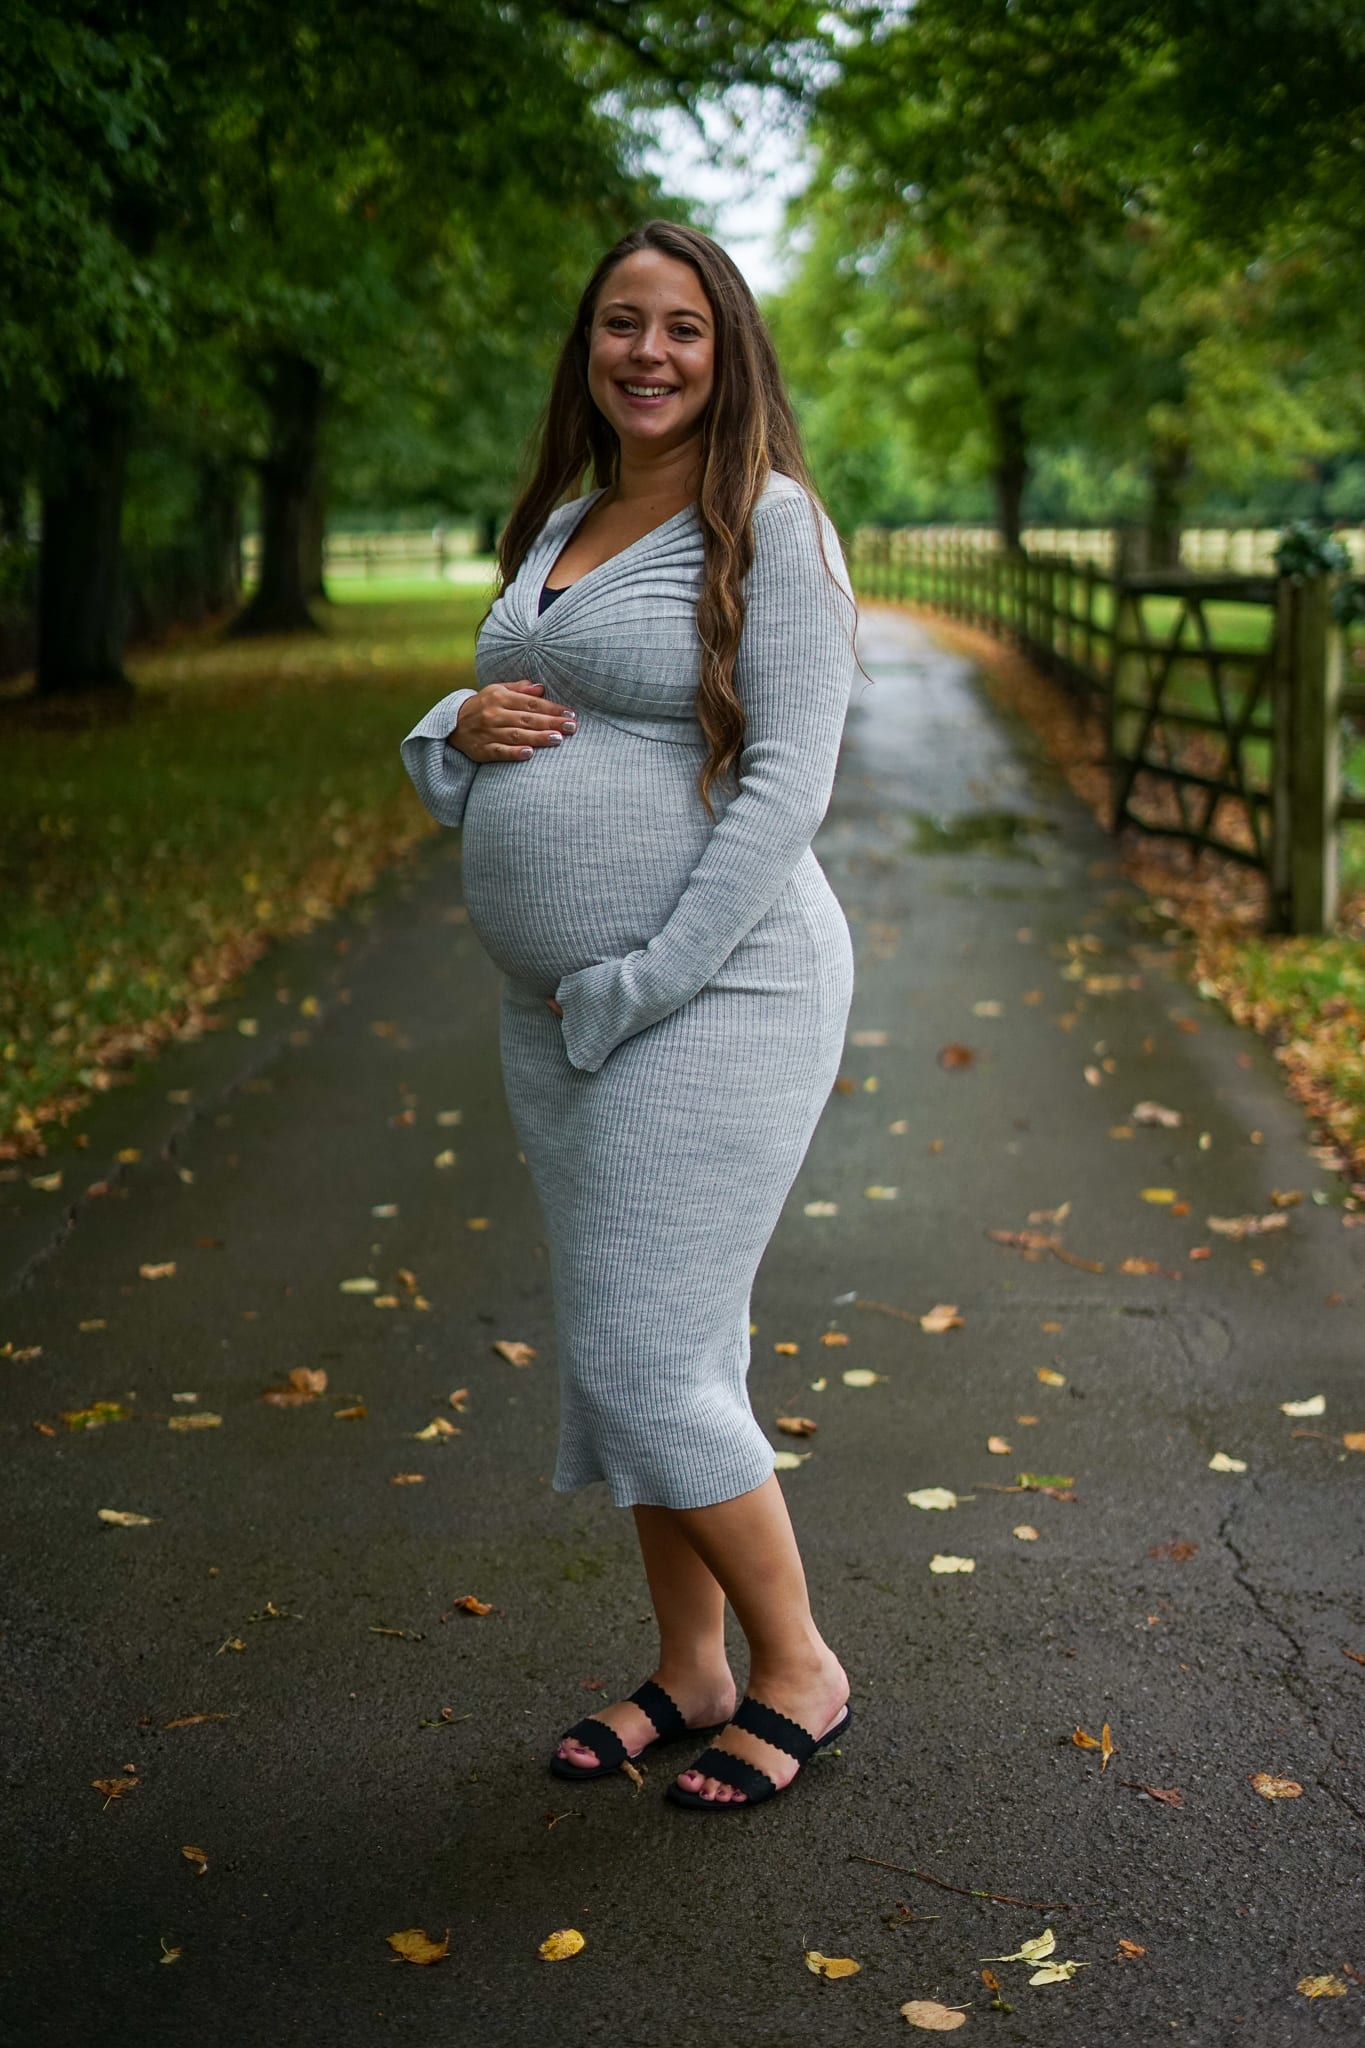 Mum to be holding her bump on a on a Maternity Shoot